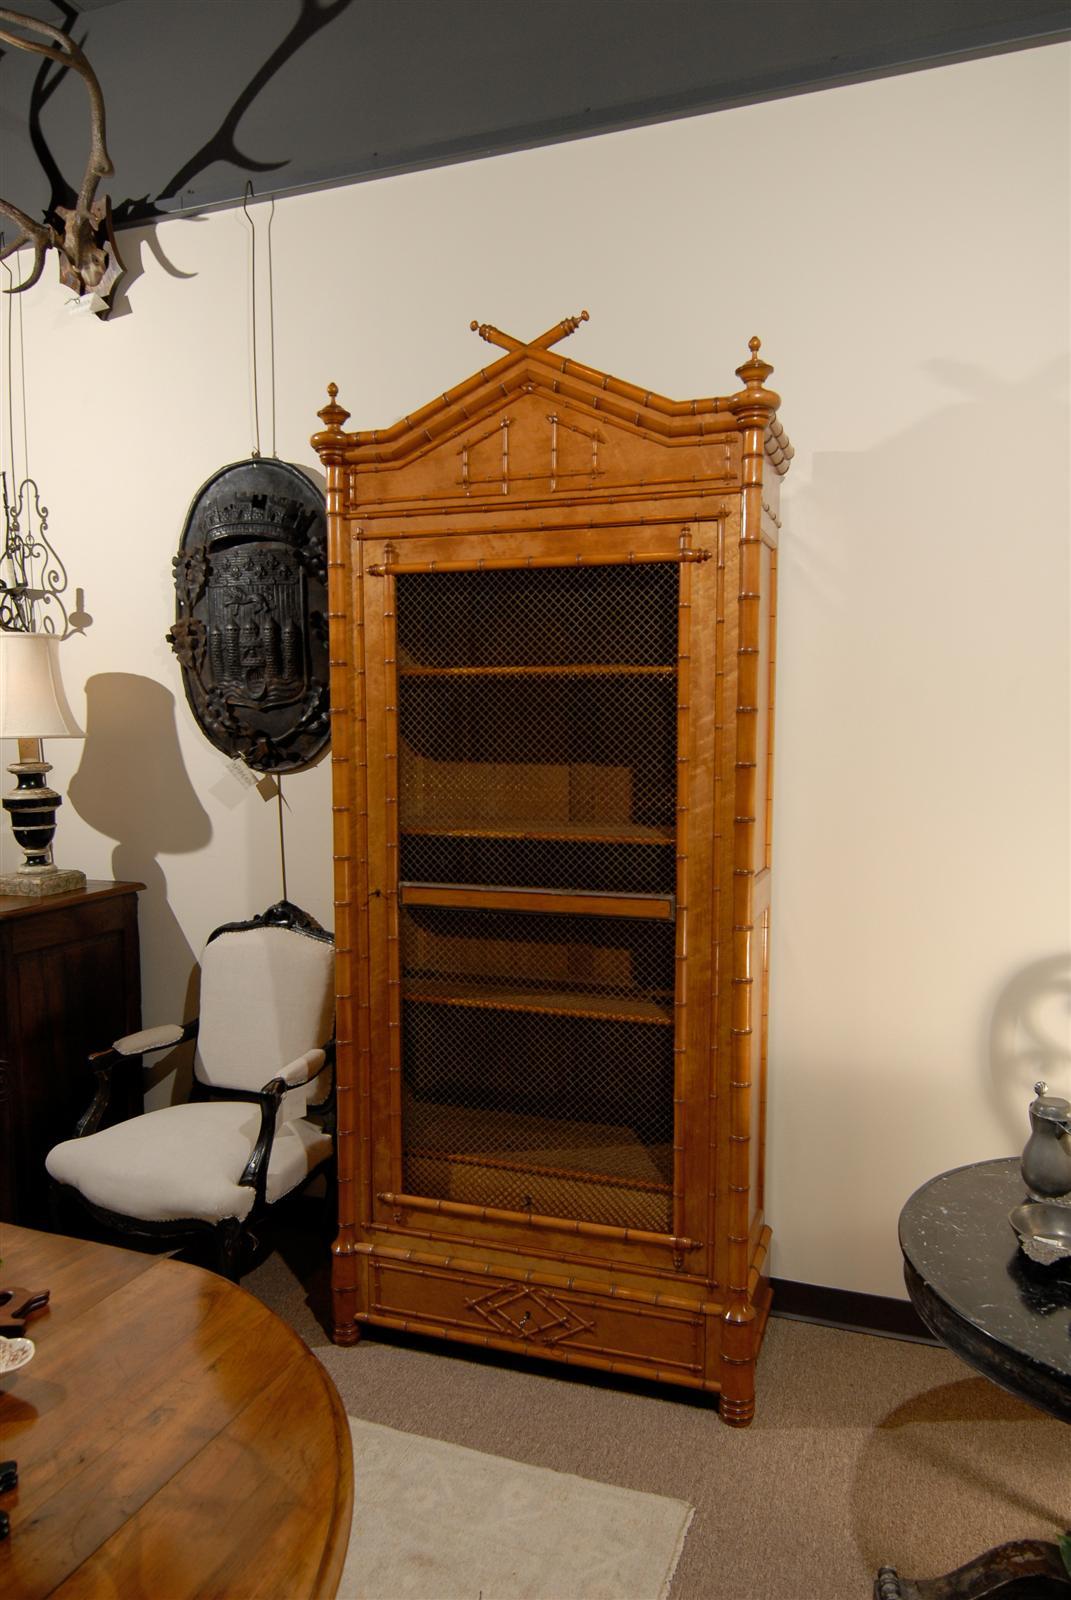 This was a popular style in the late 19th century and usually had a mirror in the door.  In this case the mirror has been replace with brass mesh which is a big improvement since the mirrored doors tended to be extremely heavy and somewhat